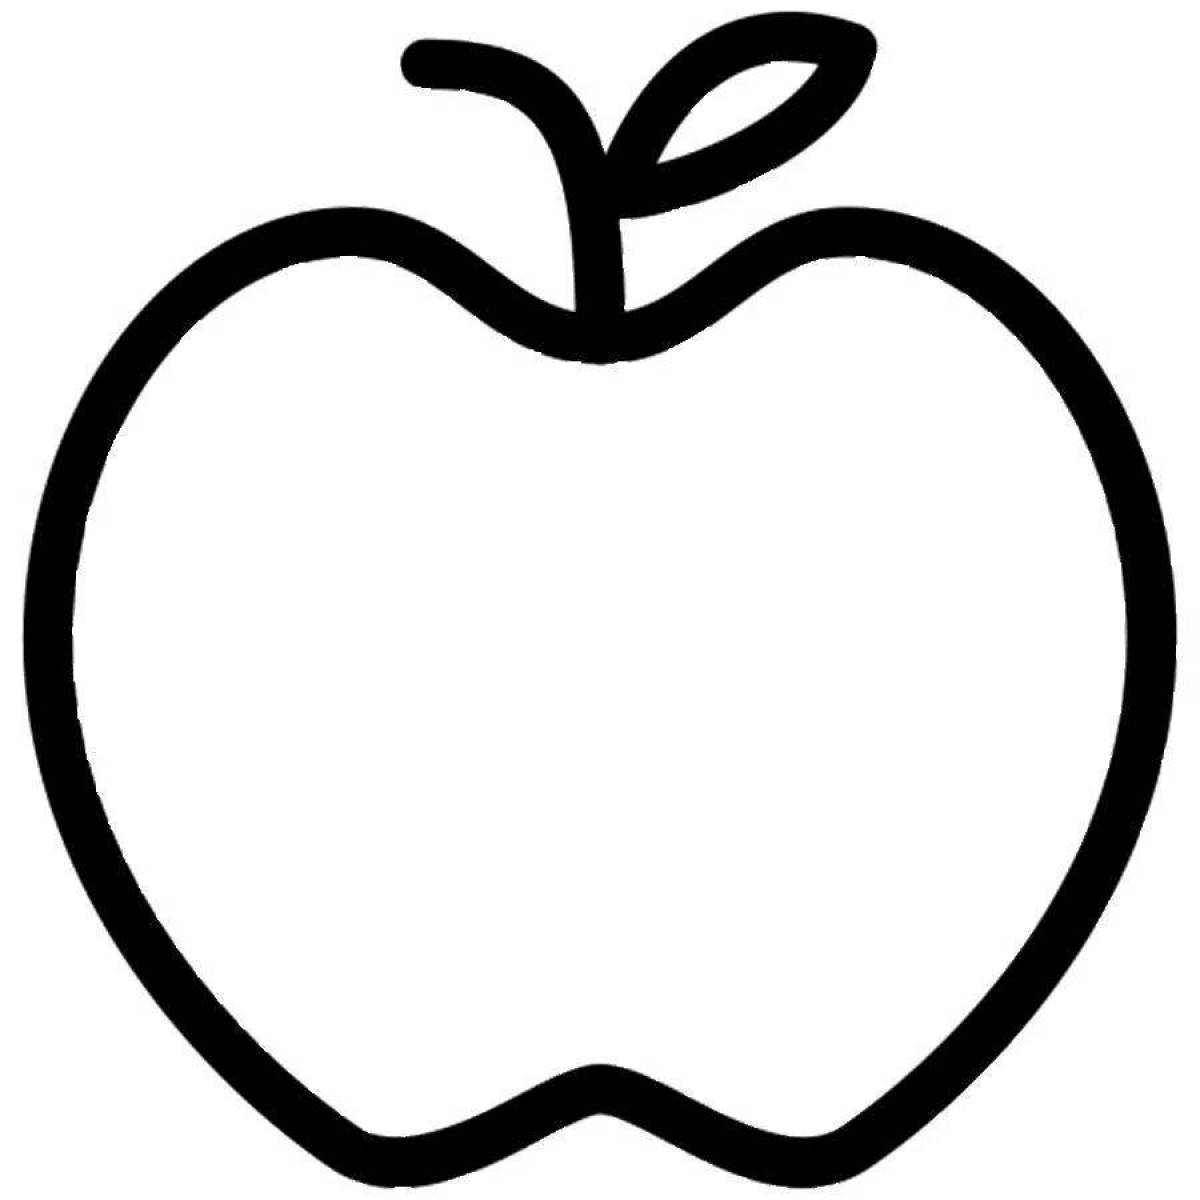 Exciting drawing of an apple